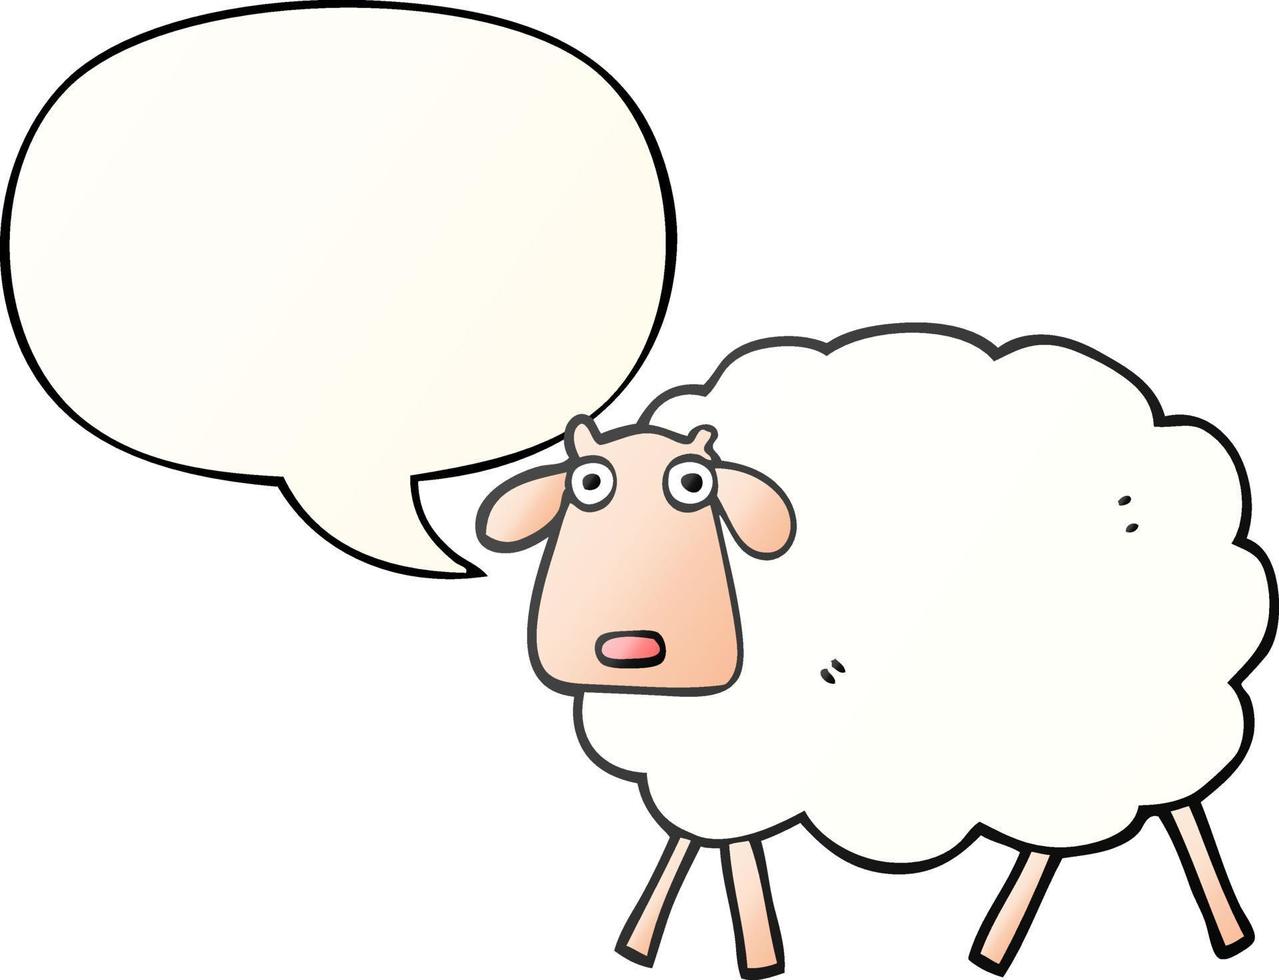 cartoon sheep and speech bubble in smooth gradient style vector